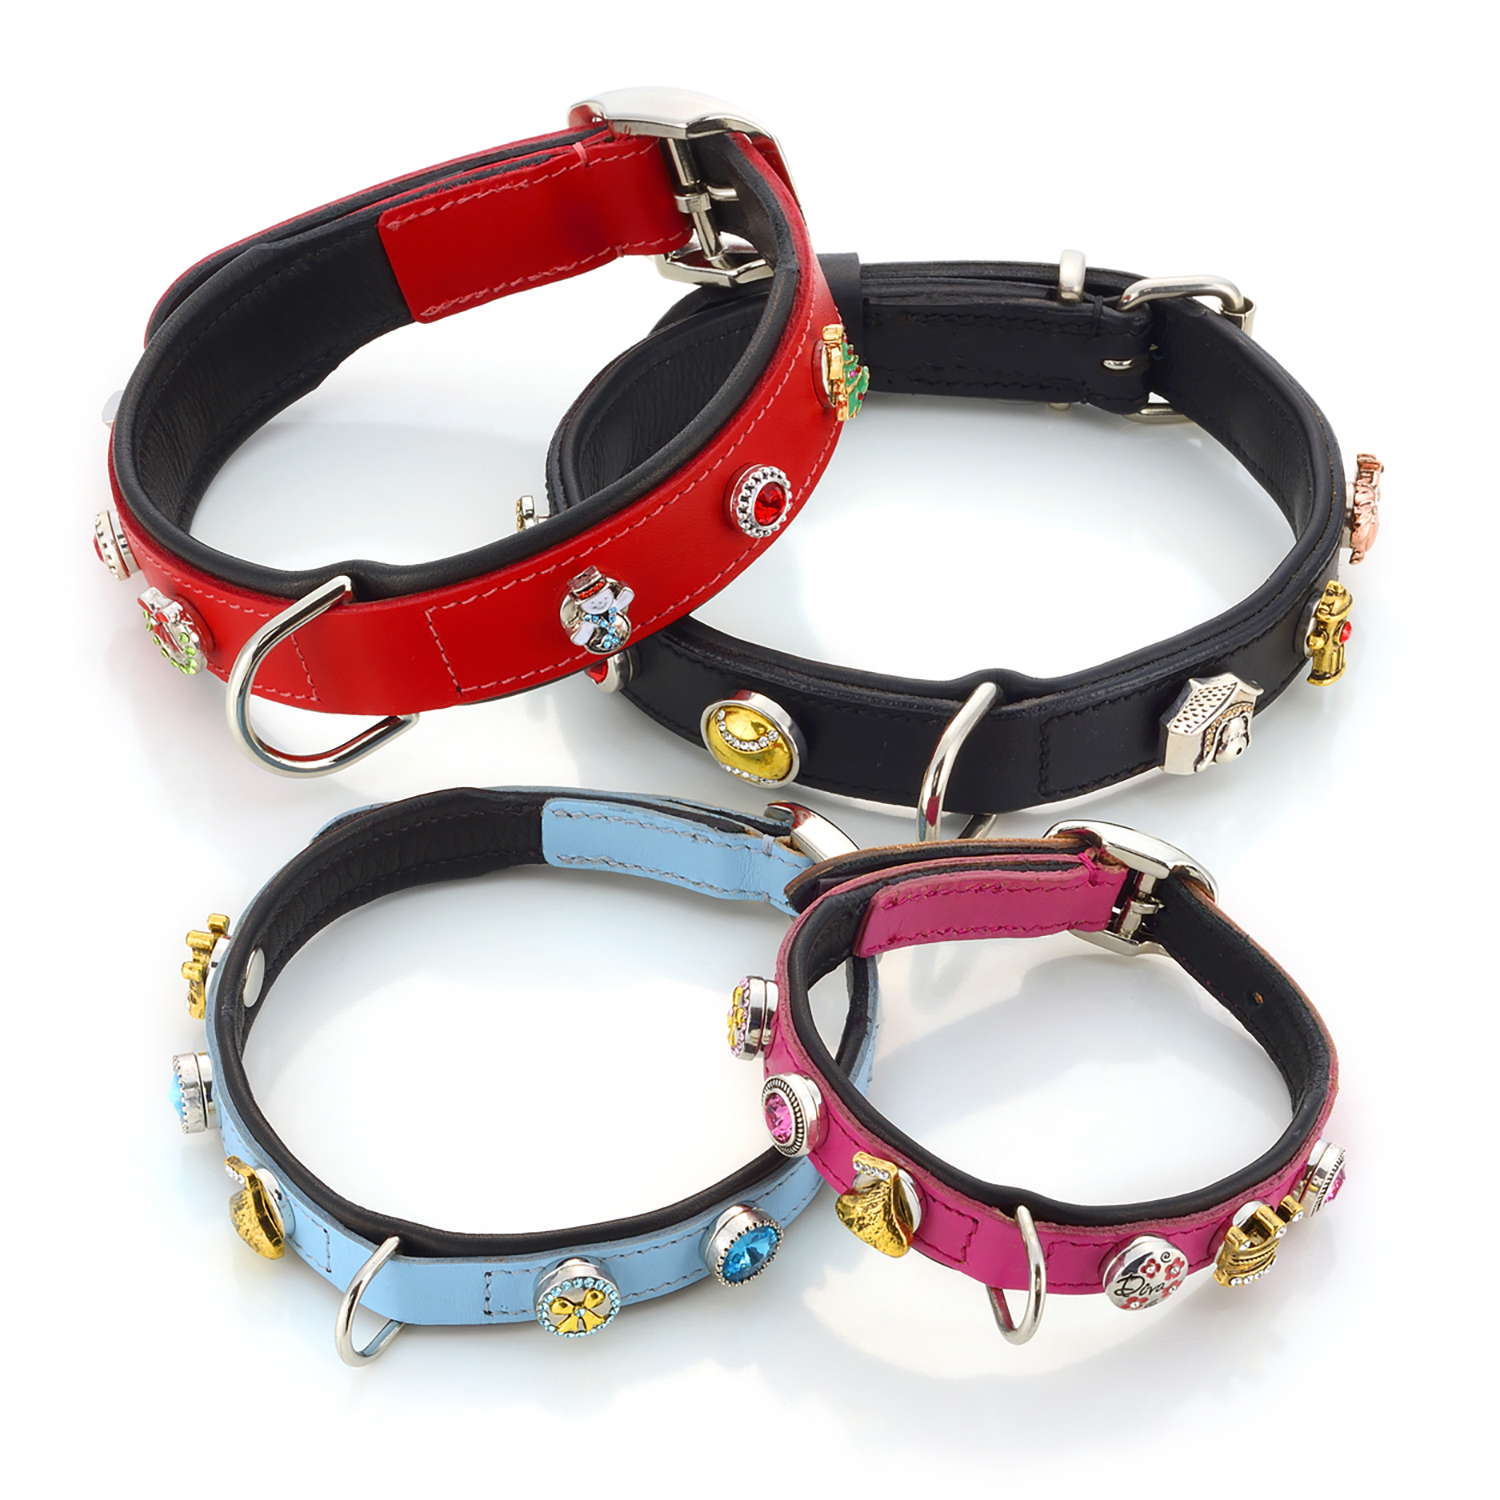 Styled product photo of four pet collars, one red, one black, one blue and one pink, all with decorative charms attached, all on white background Product Photography